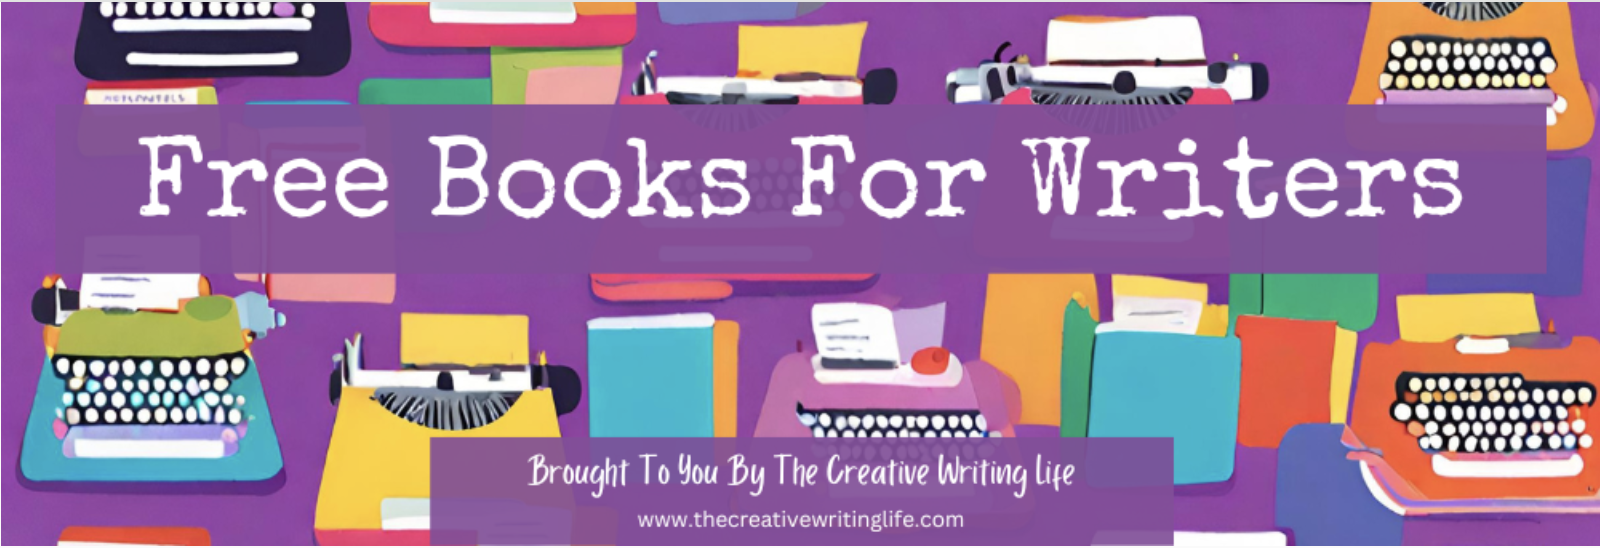 Nonfiction books for writers giveaway. Enjoy!